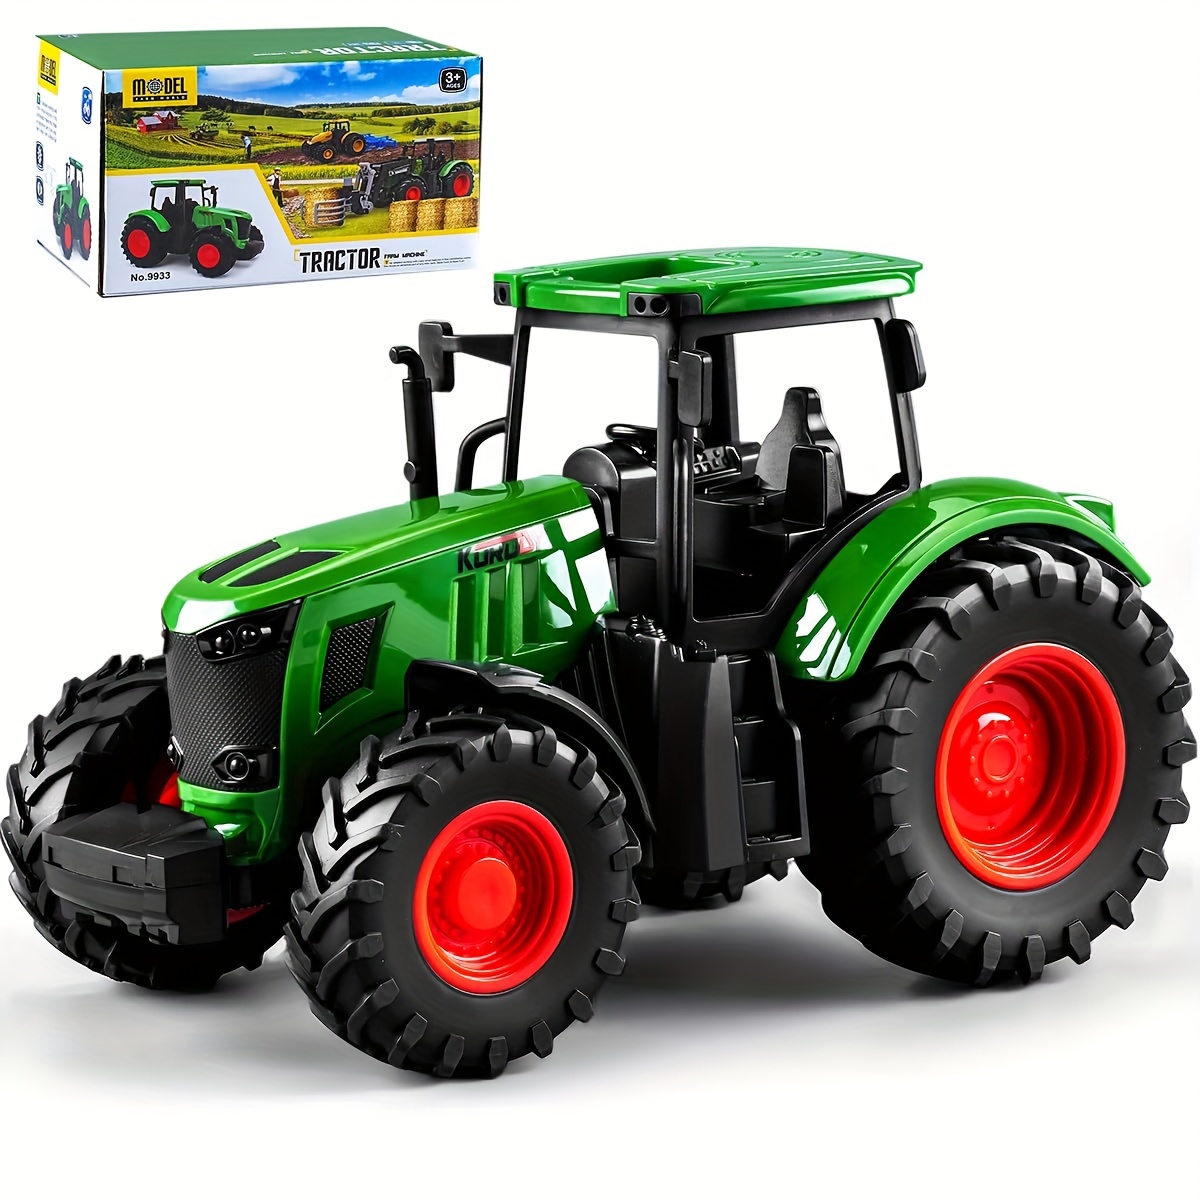 

Tractor Toy, Realistic Farm Vehicle Toy Push And Go Truck Car Tractor Toy For Halloween And Christmas Birthday Gifts. Ideal Toy And Collection.